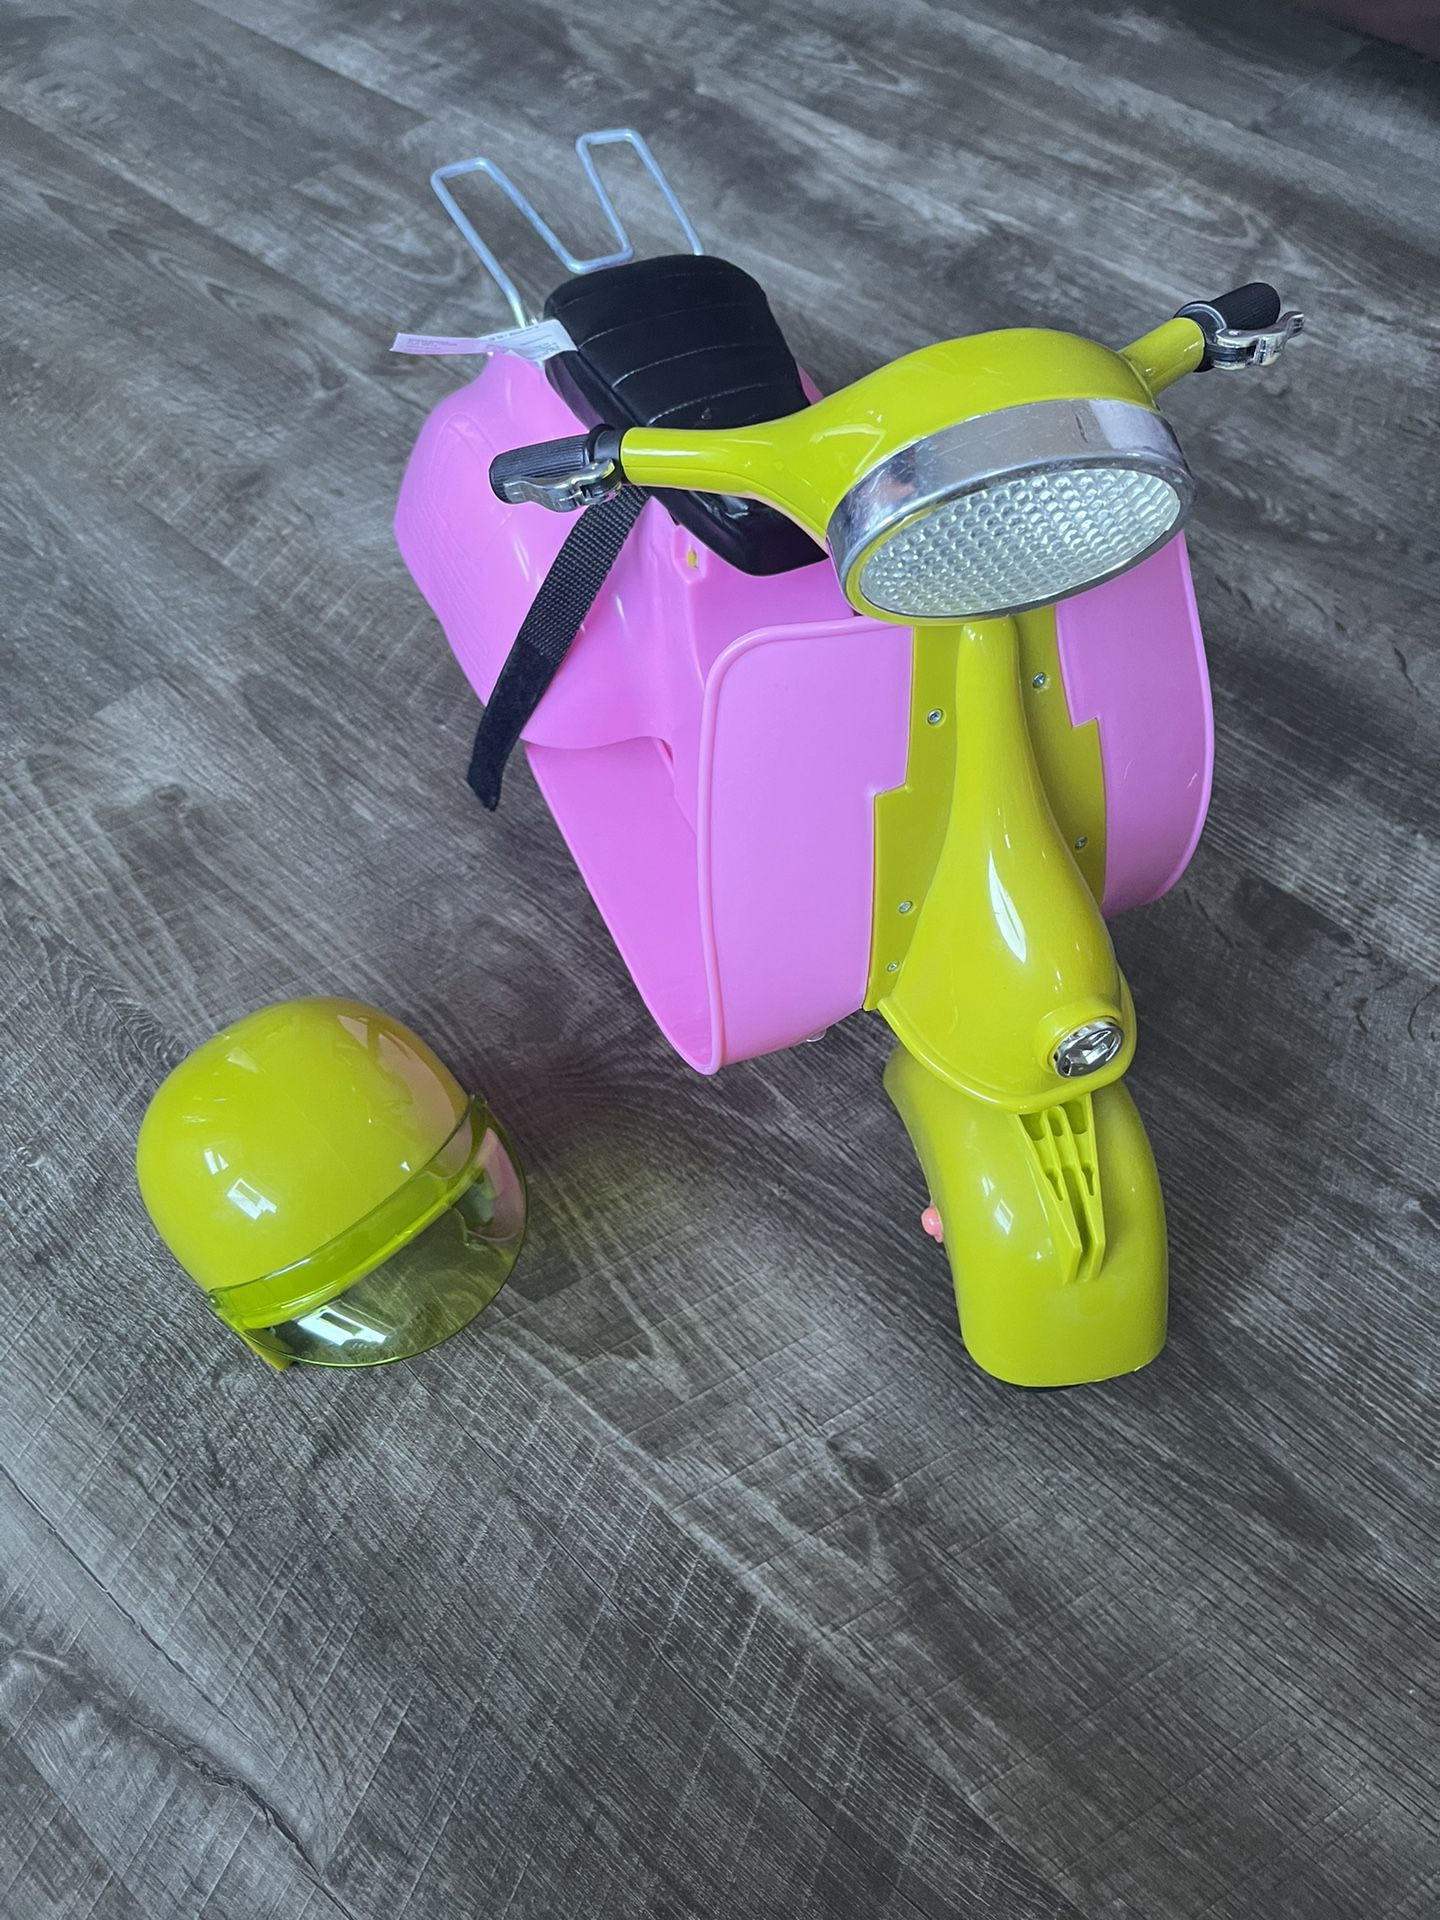 American girl Sized Scooter With Helmet 